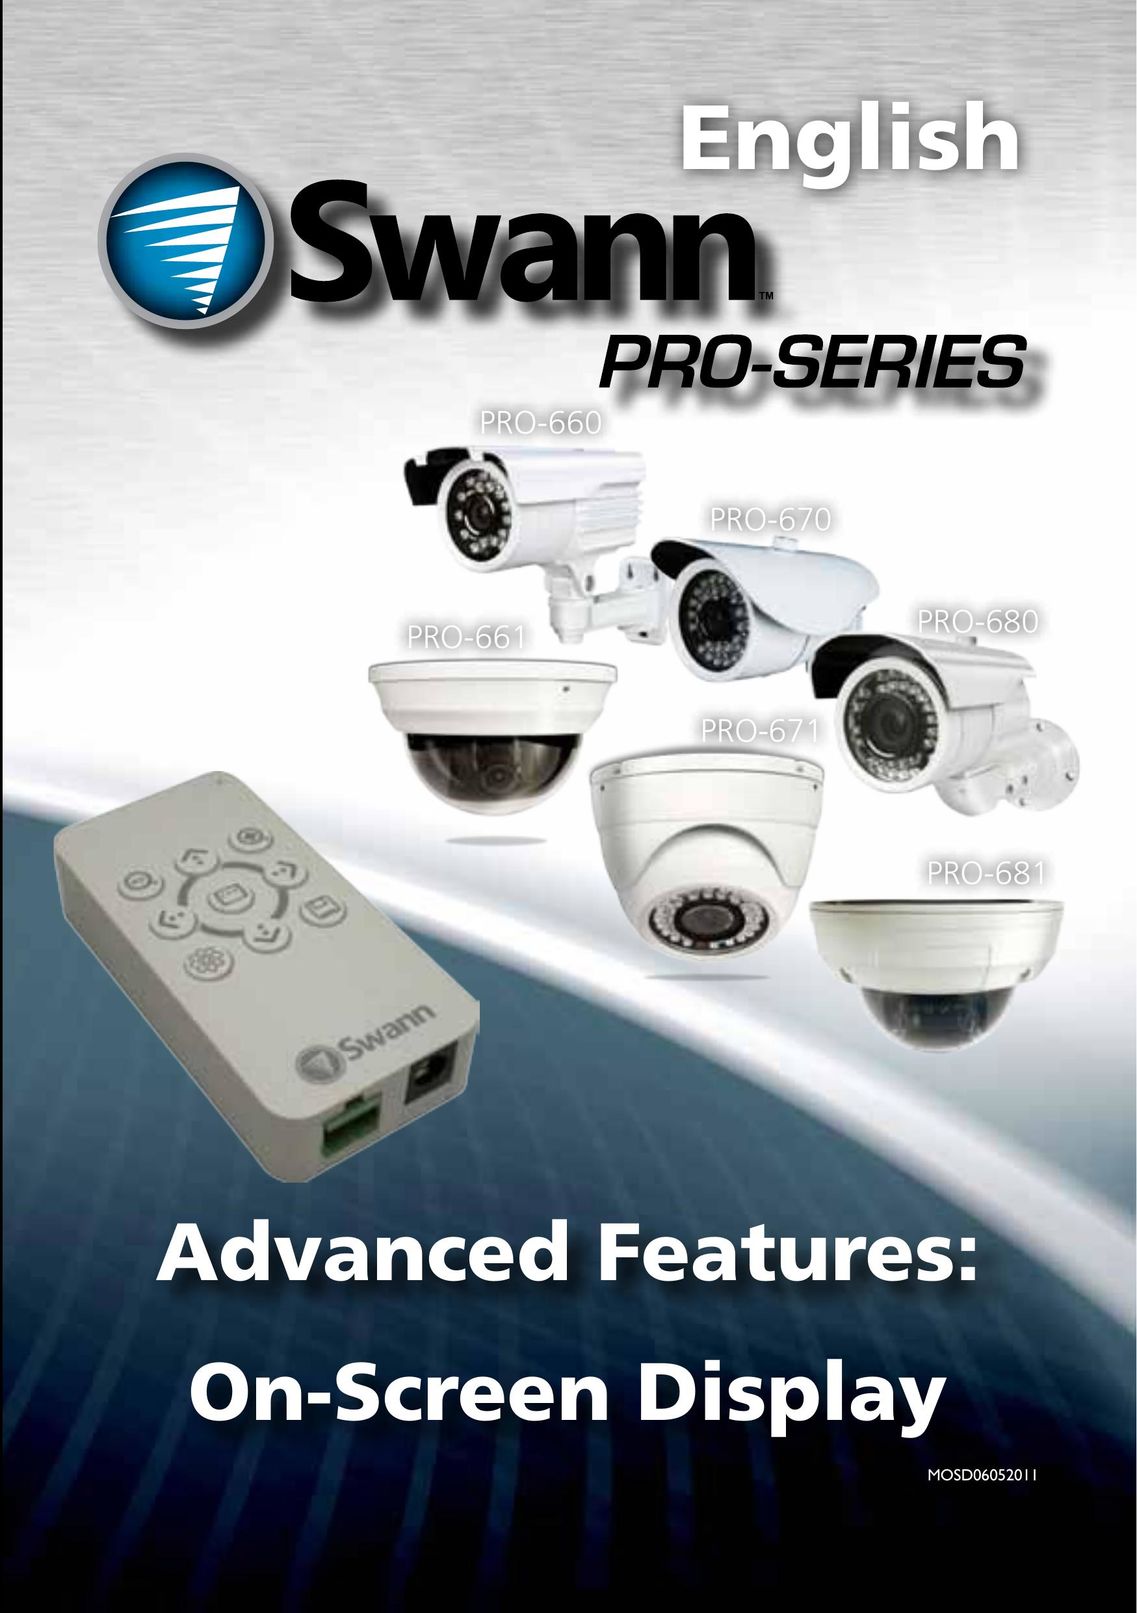 Swann PRO-671 Home Security System User Manual